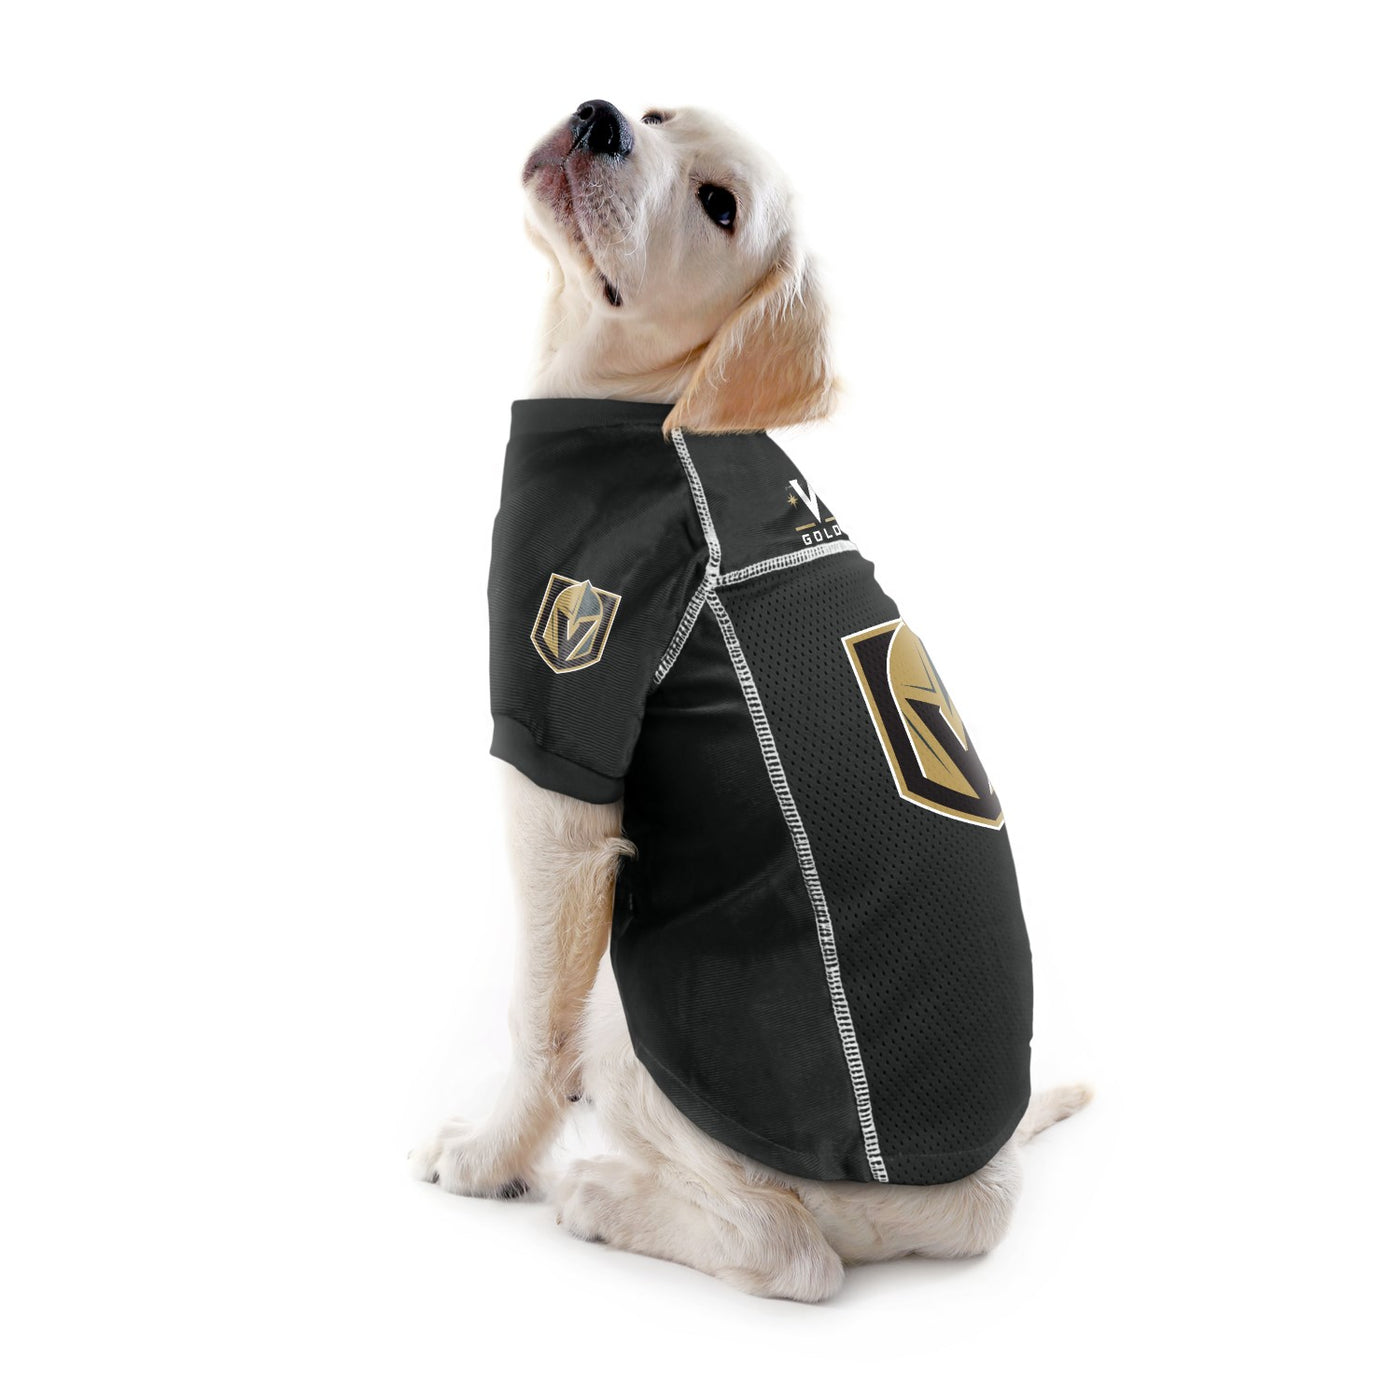 Pets First NHL Boston Bruins Mesh Jersey for Dogs and Cats - Licensed